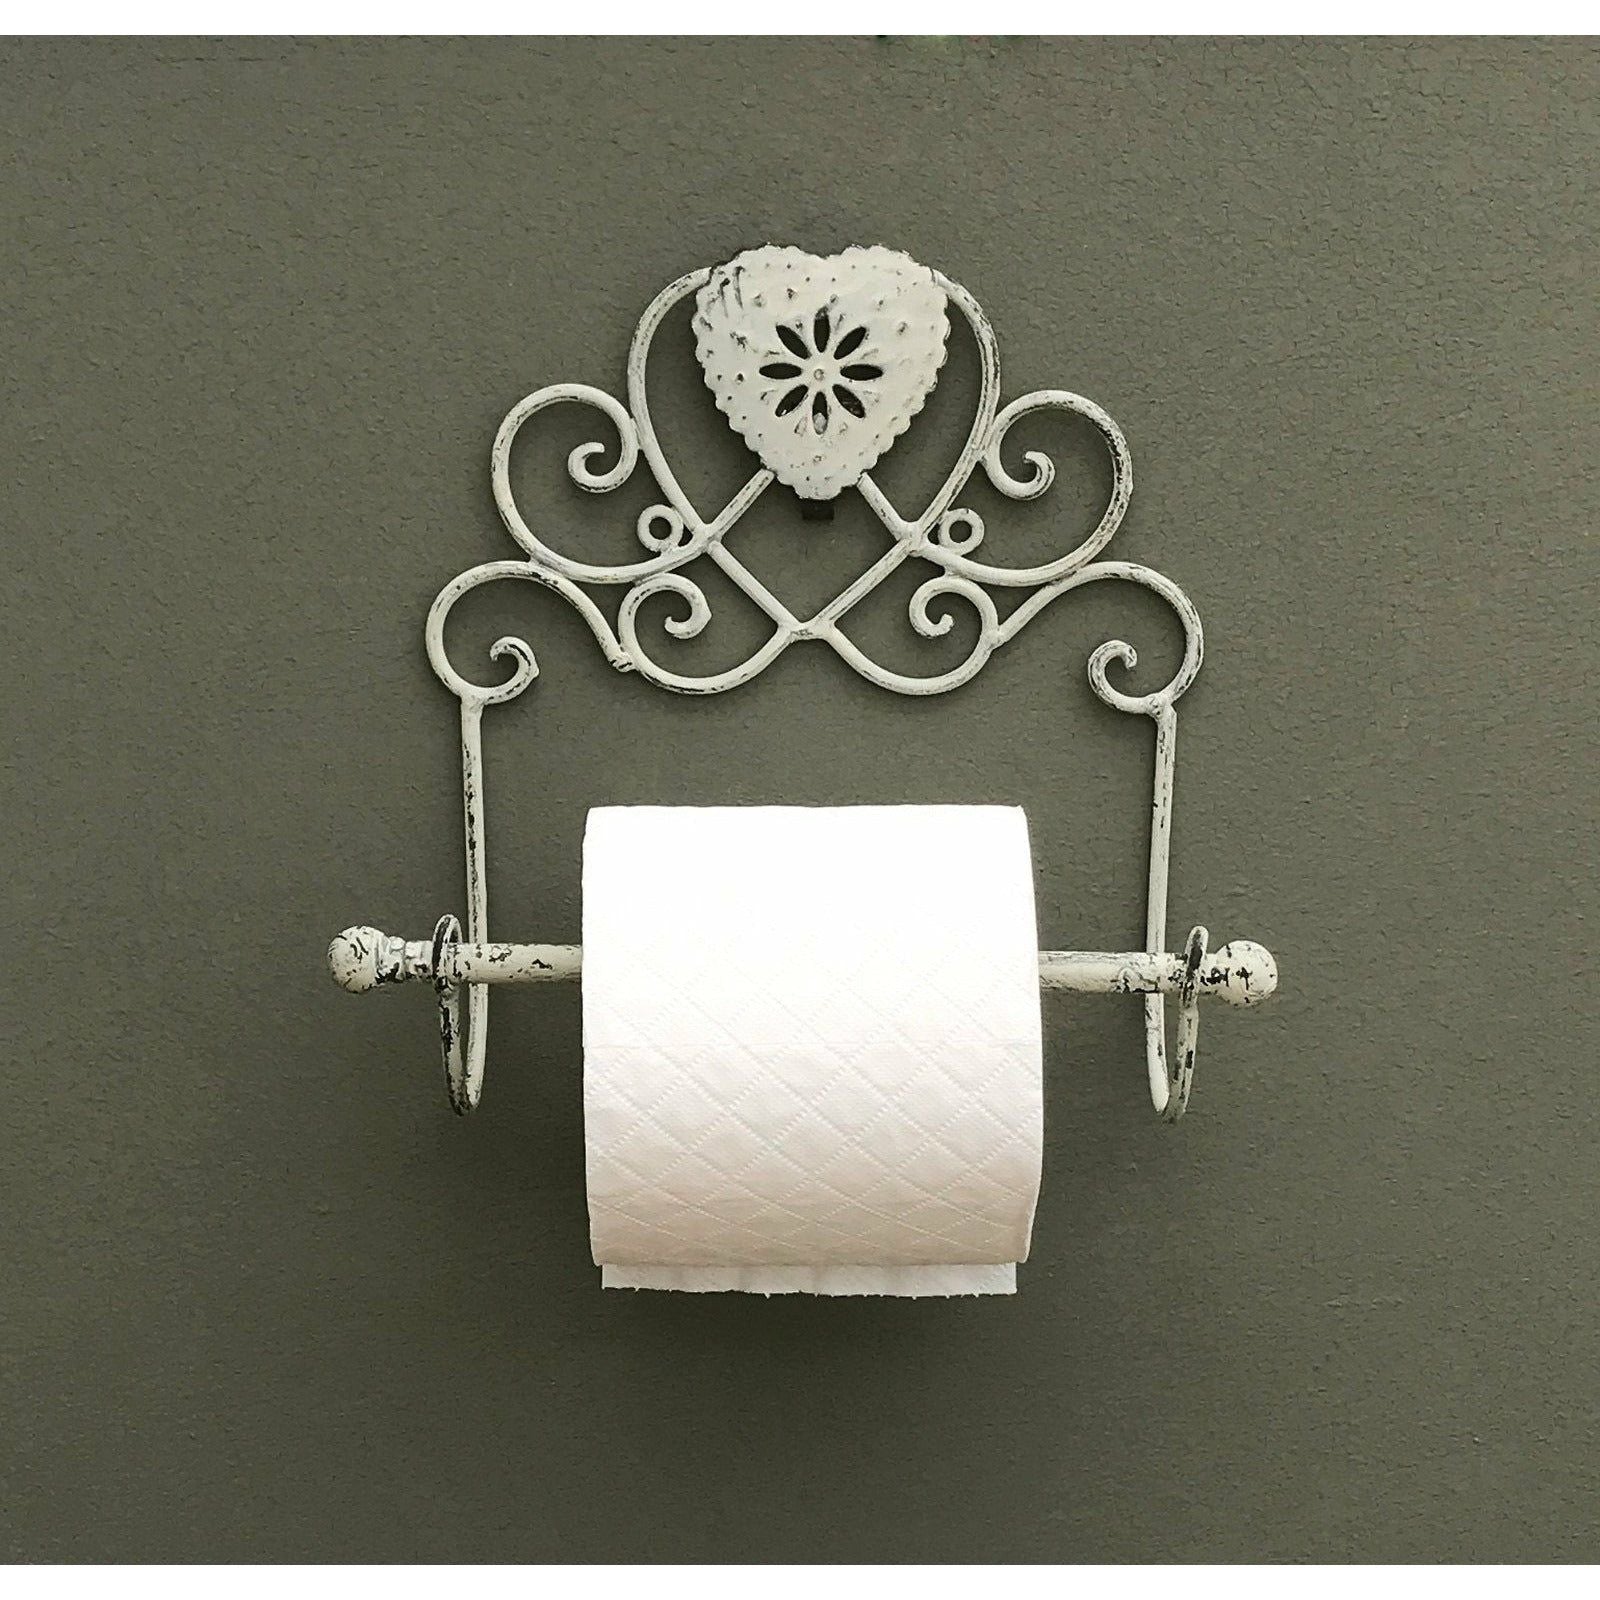 Grey Heart Toilet Roll Holder Wall Mounted - Ashton and Finch